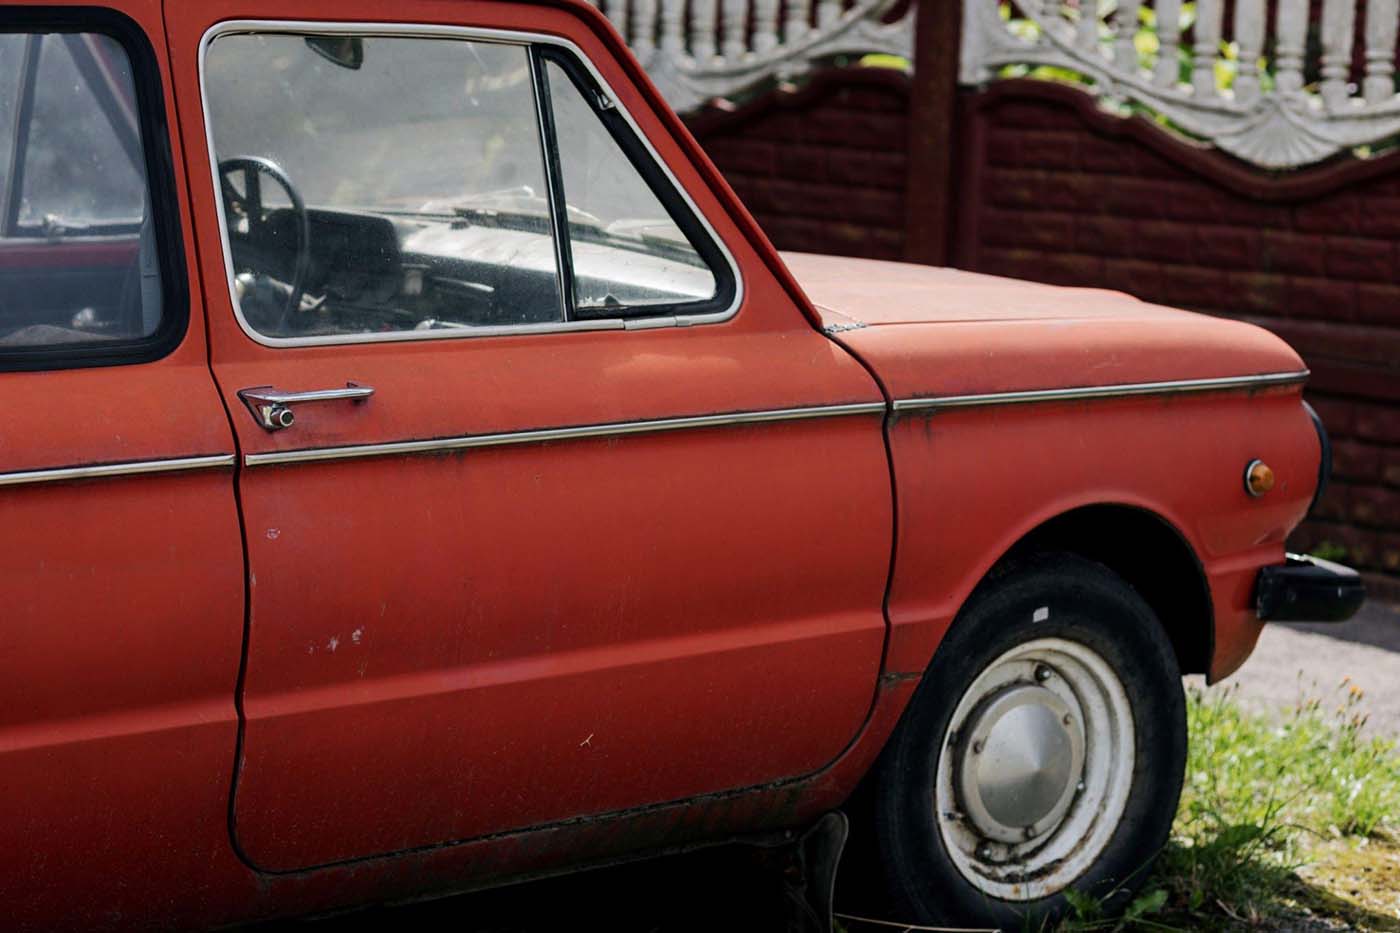 Want to Get Rid of a Car That Doesn’t Run? Here Are Your Options